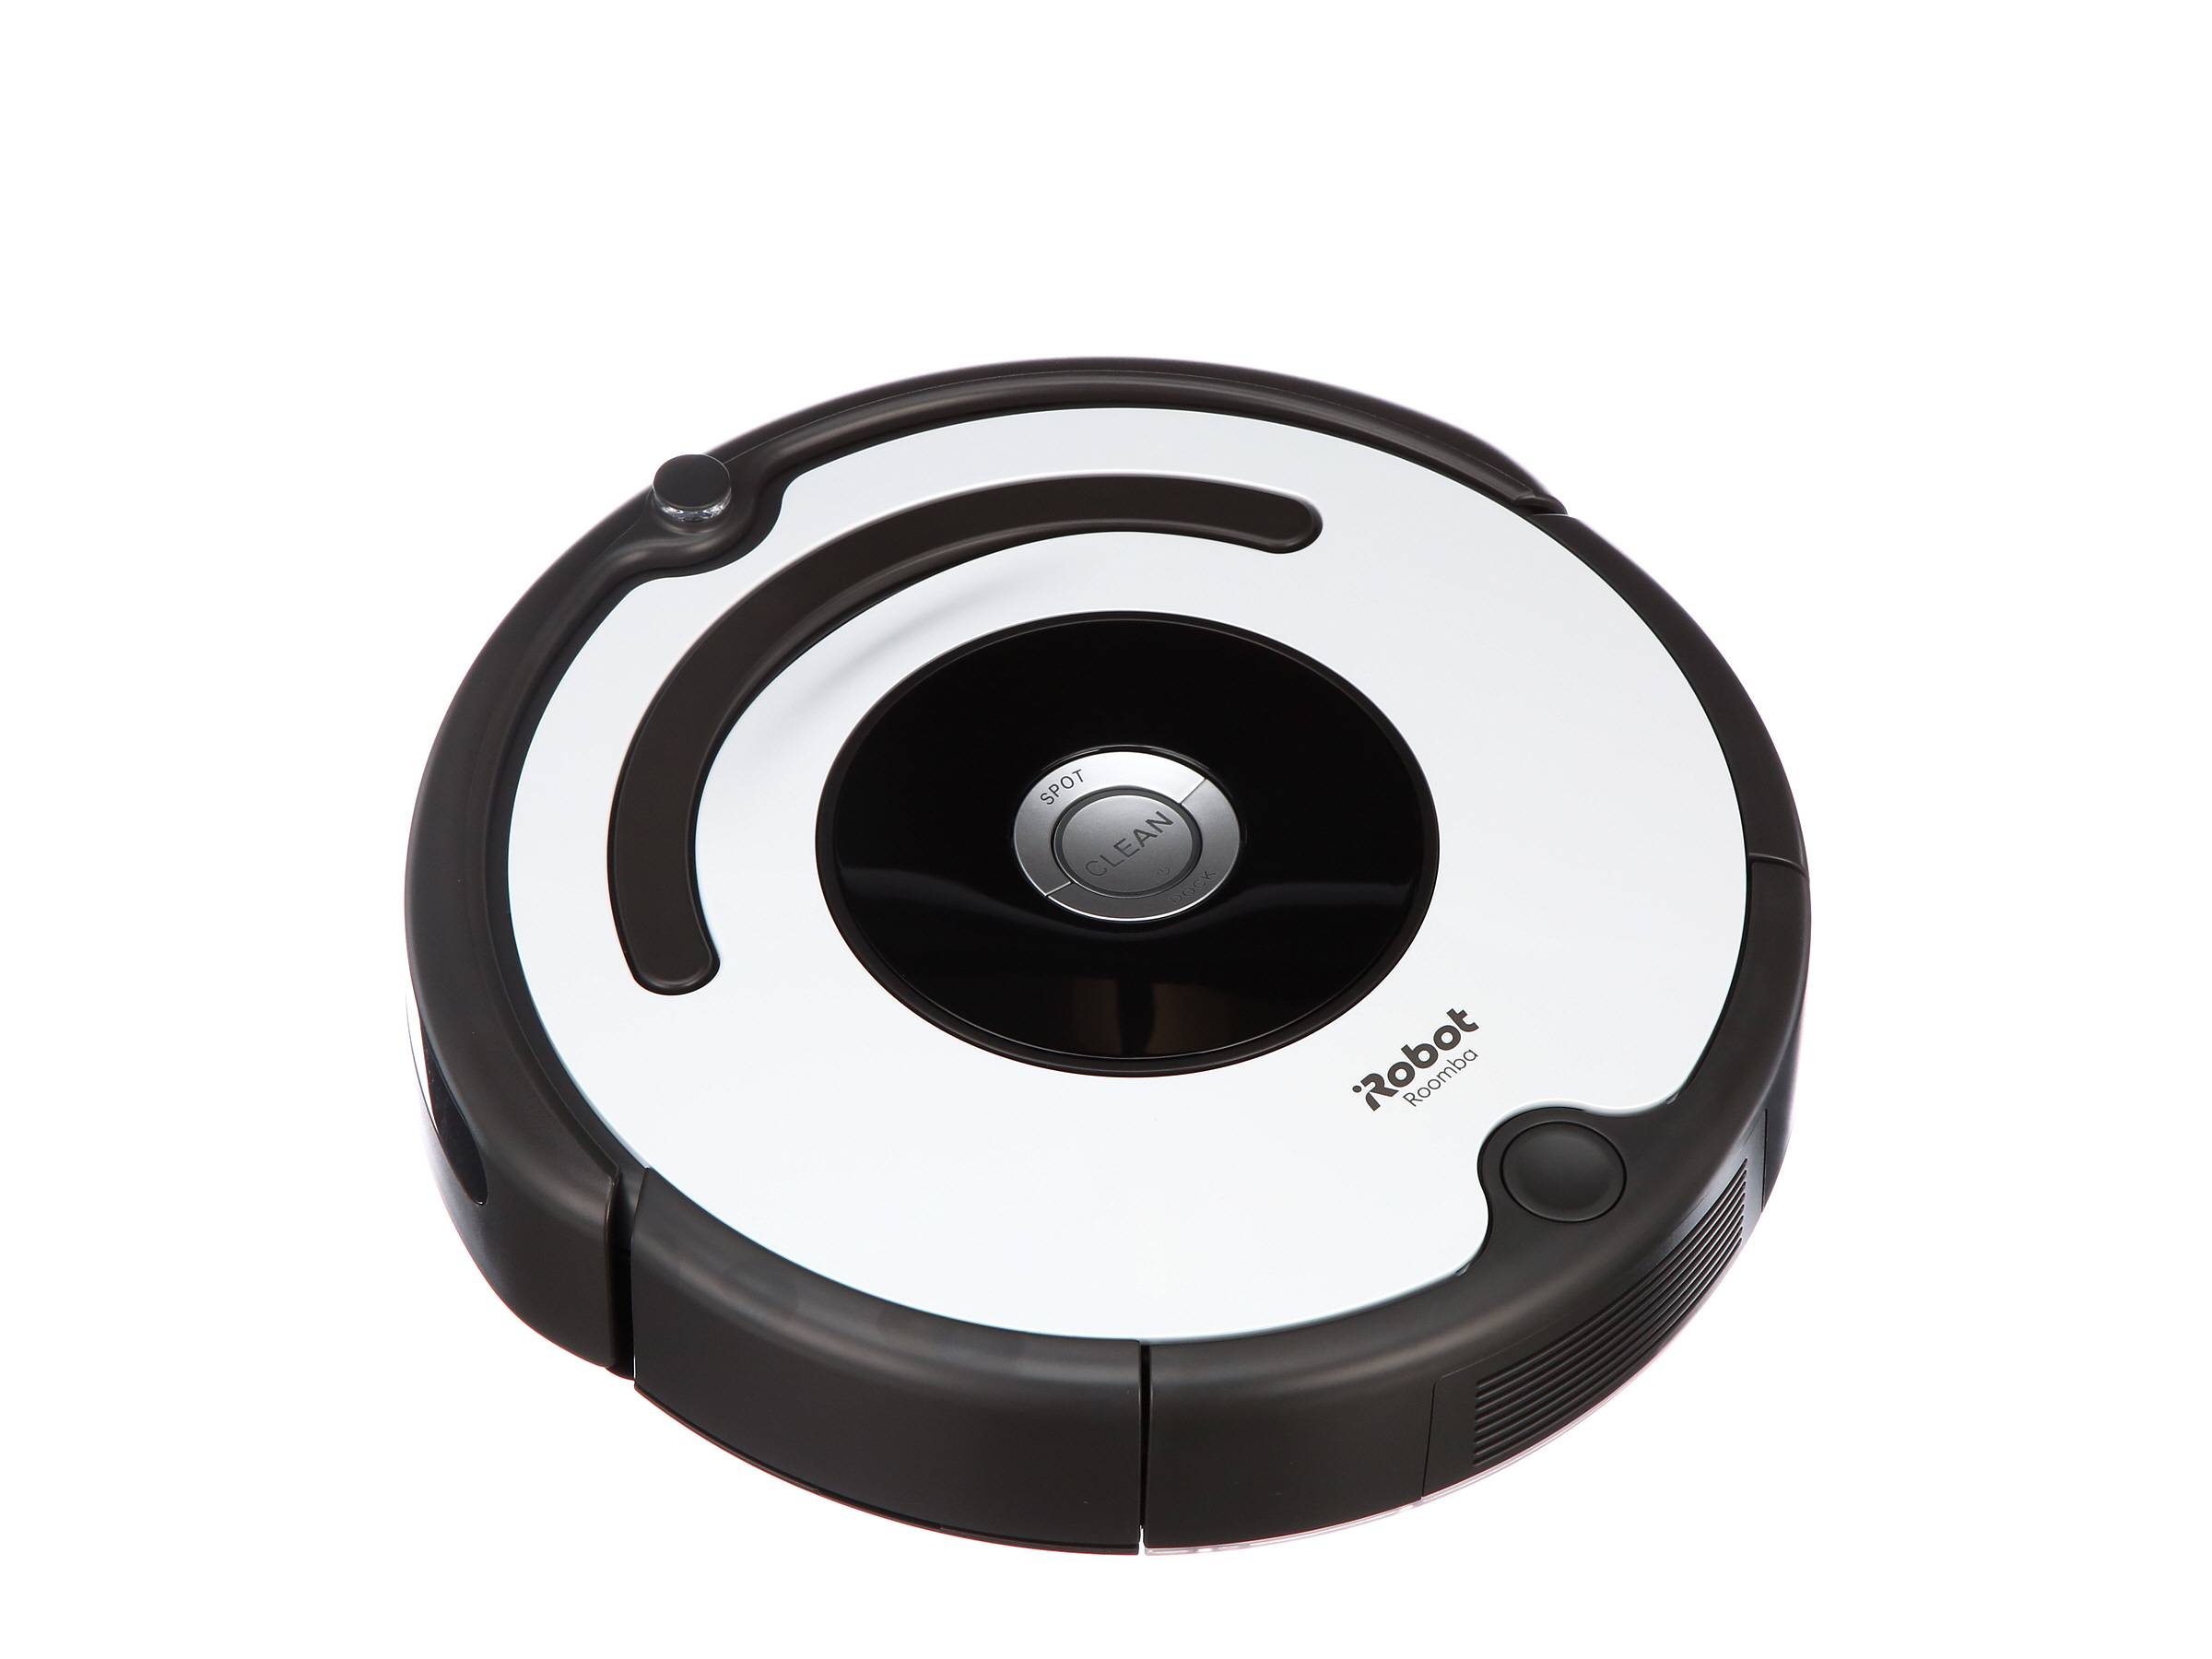 iRobot Roomba 670 Robot Vacuum-Wi-Fi Connectivity, Works with